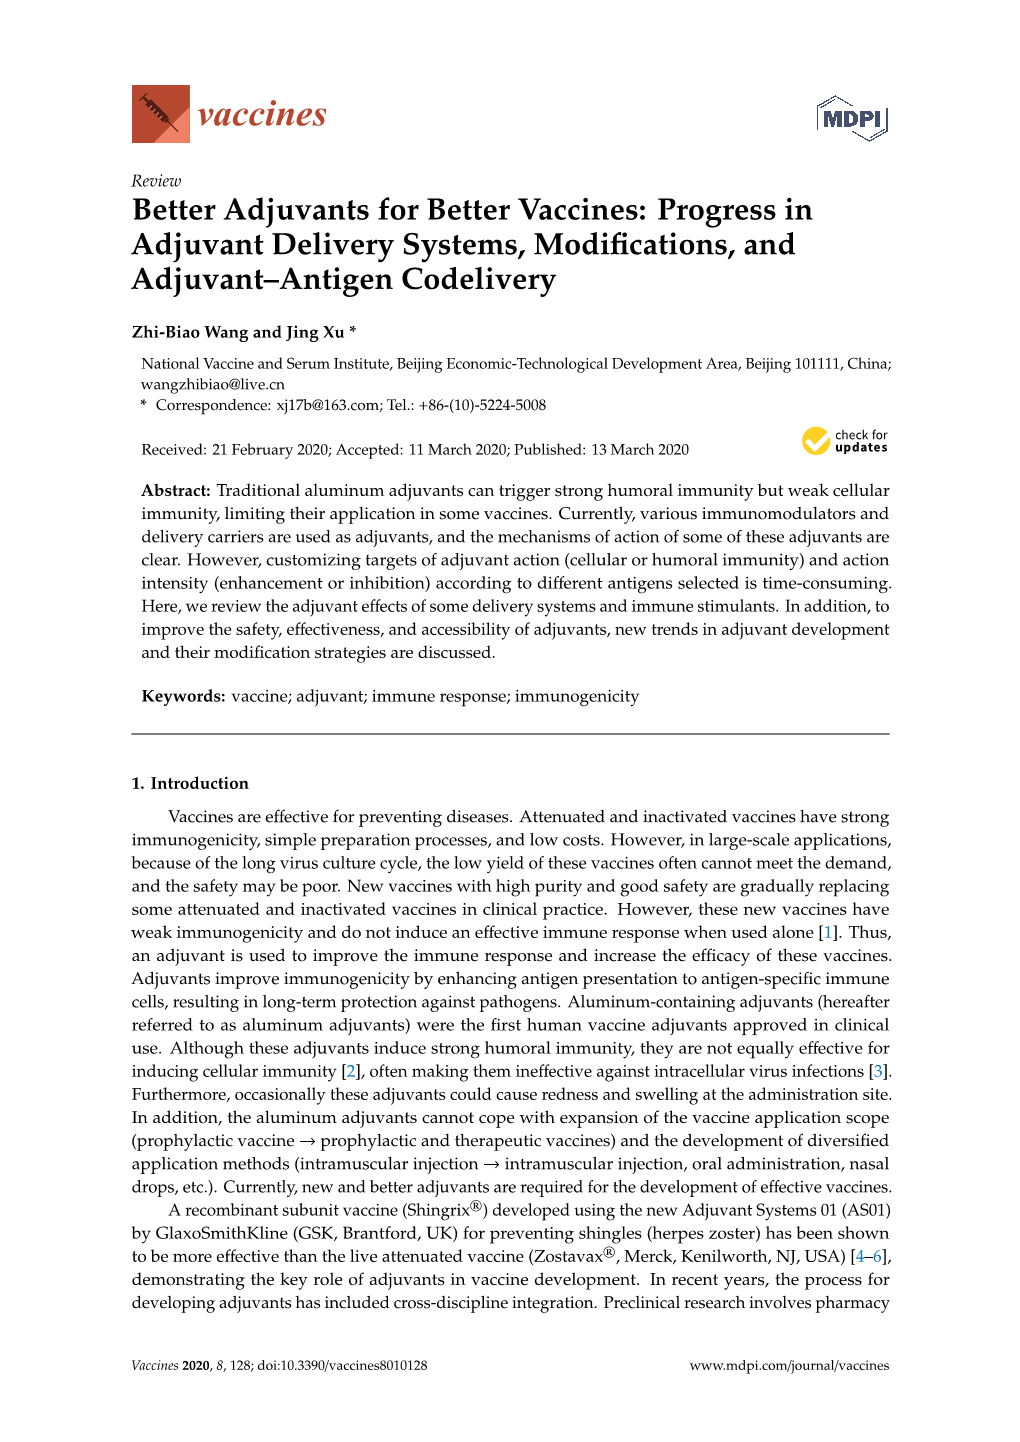 Better Adjuvants for Better Vaccines: Progress in Adjuvant Delivery Systems, Modiﬁcations, and Adjuvant–Antigen Codelivery